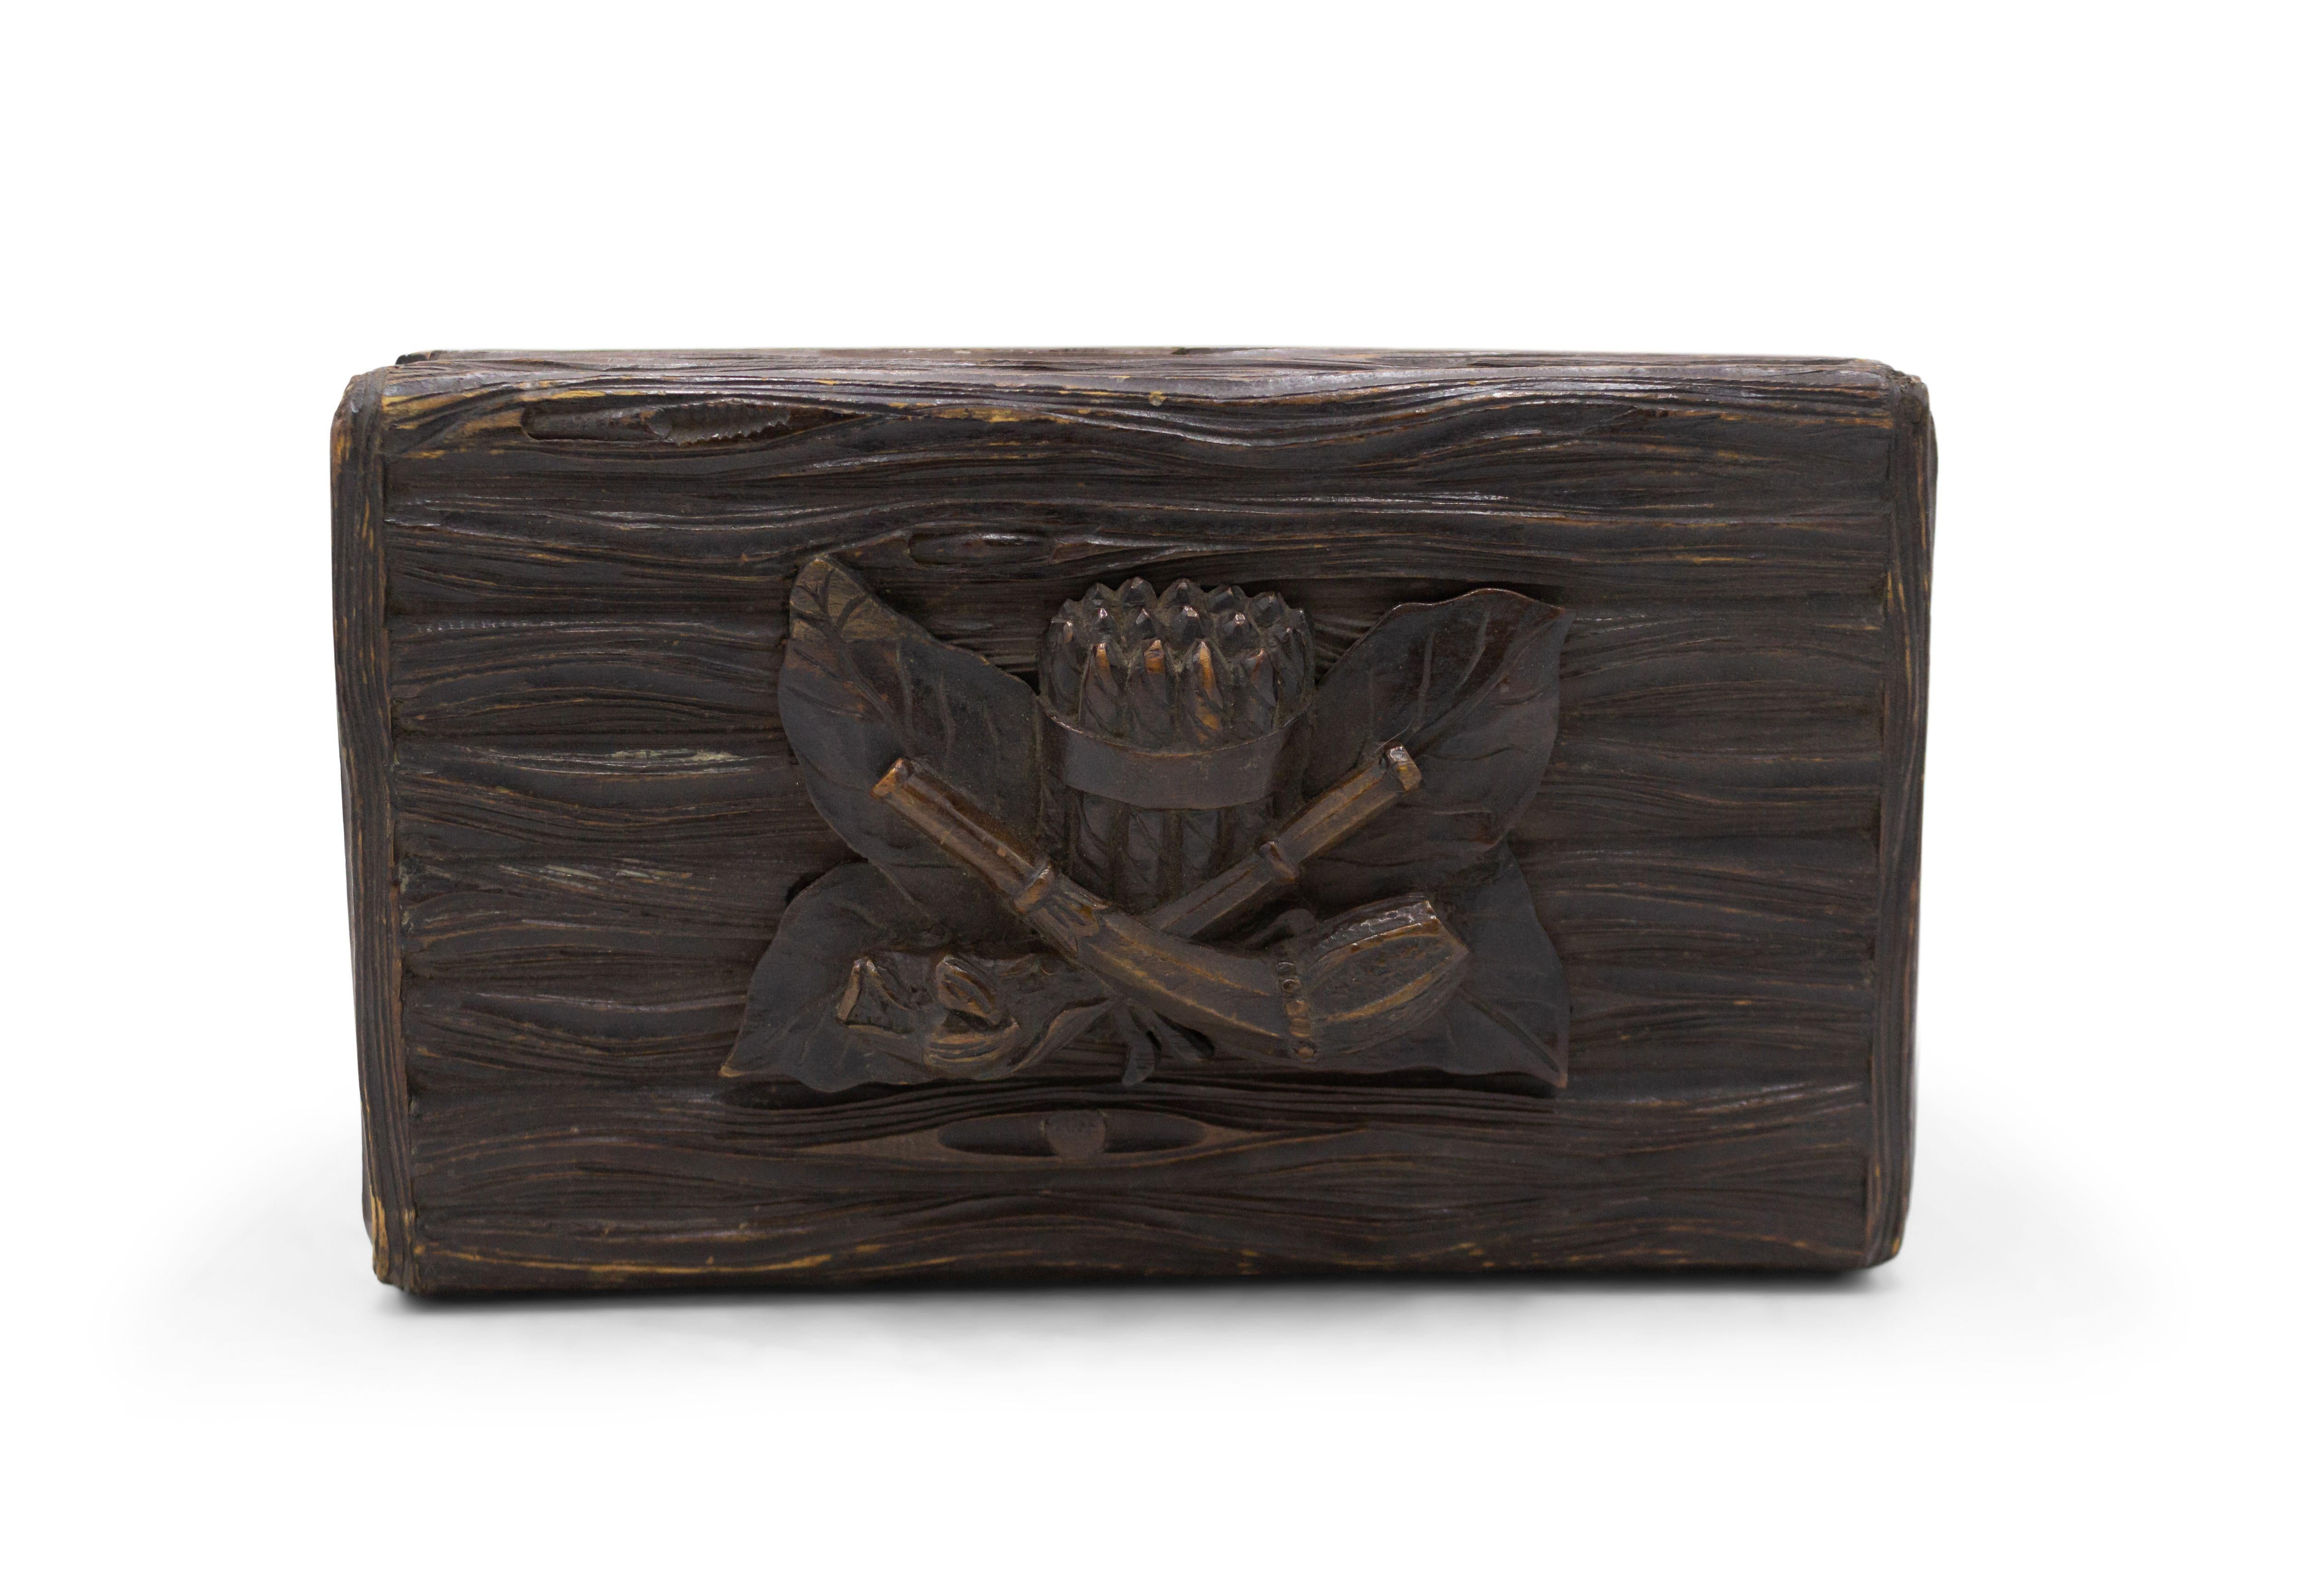 Rustic Black Forest (19thcentury) walnut carved humidor box with faux wood design and smoking motif on top (interior of top has smoking accessories).
       